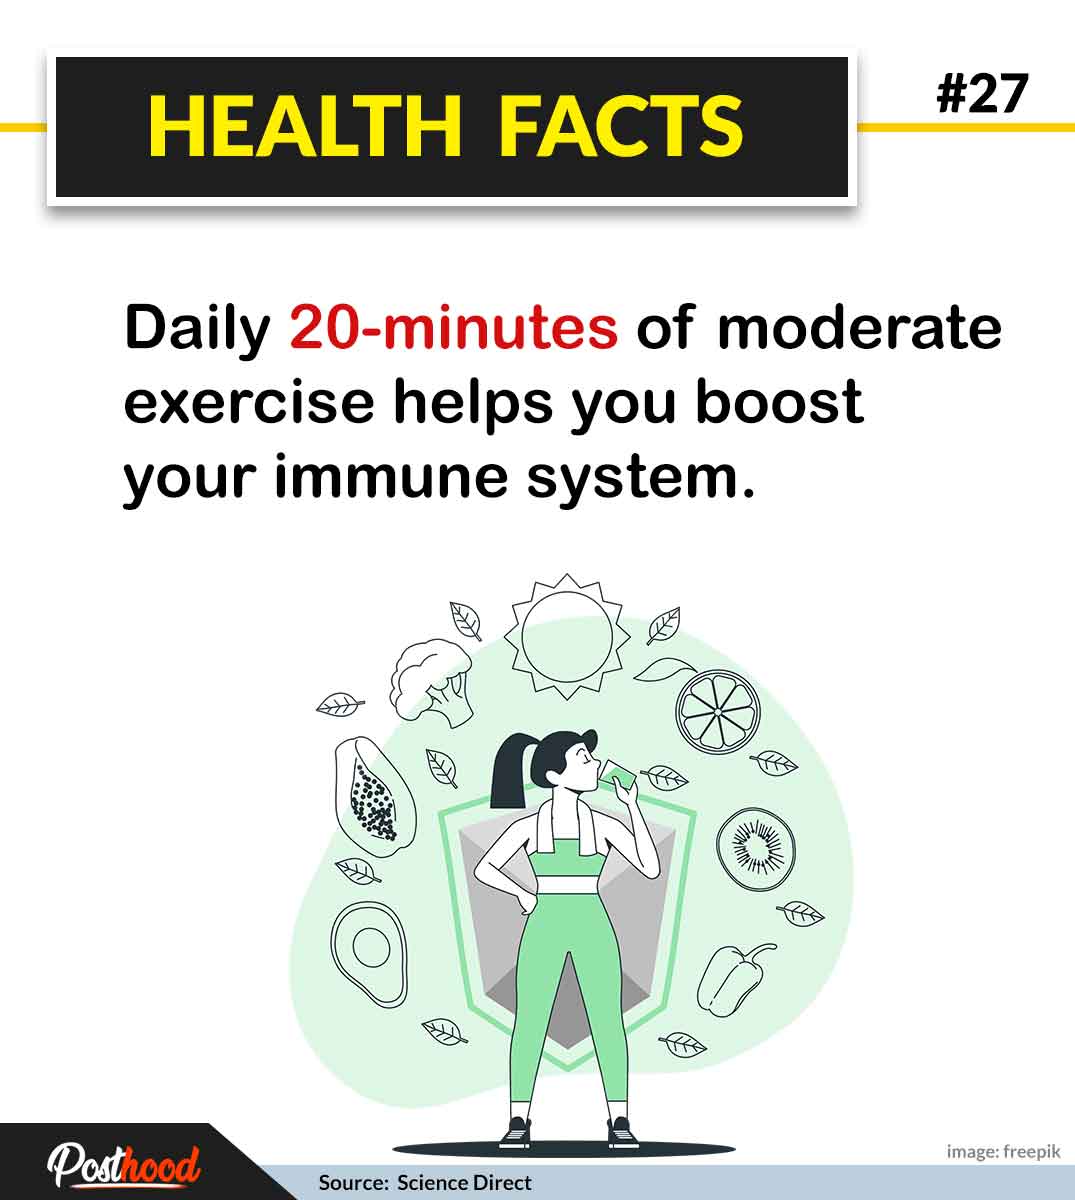 Want to build stronger immunity? Try to move your body as much as possible. Know more helpful health and fitness facts that can improve your life.